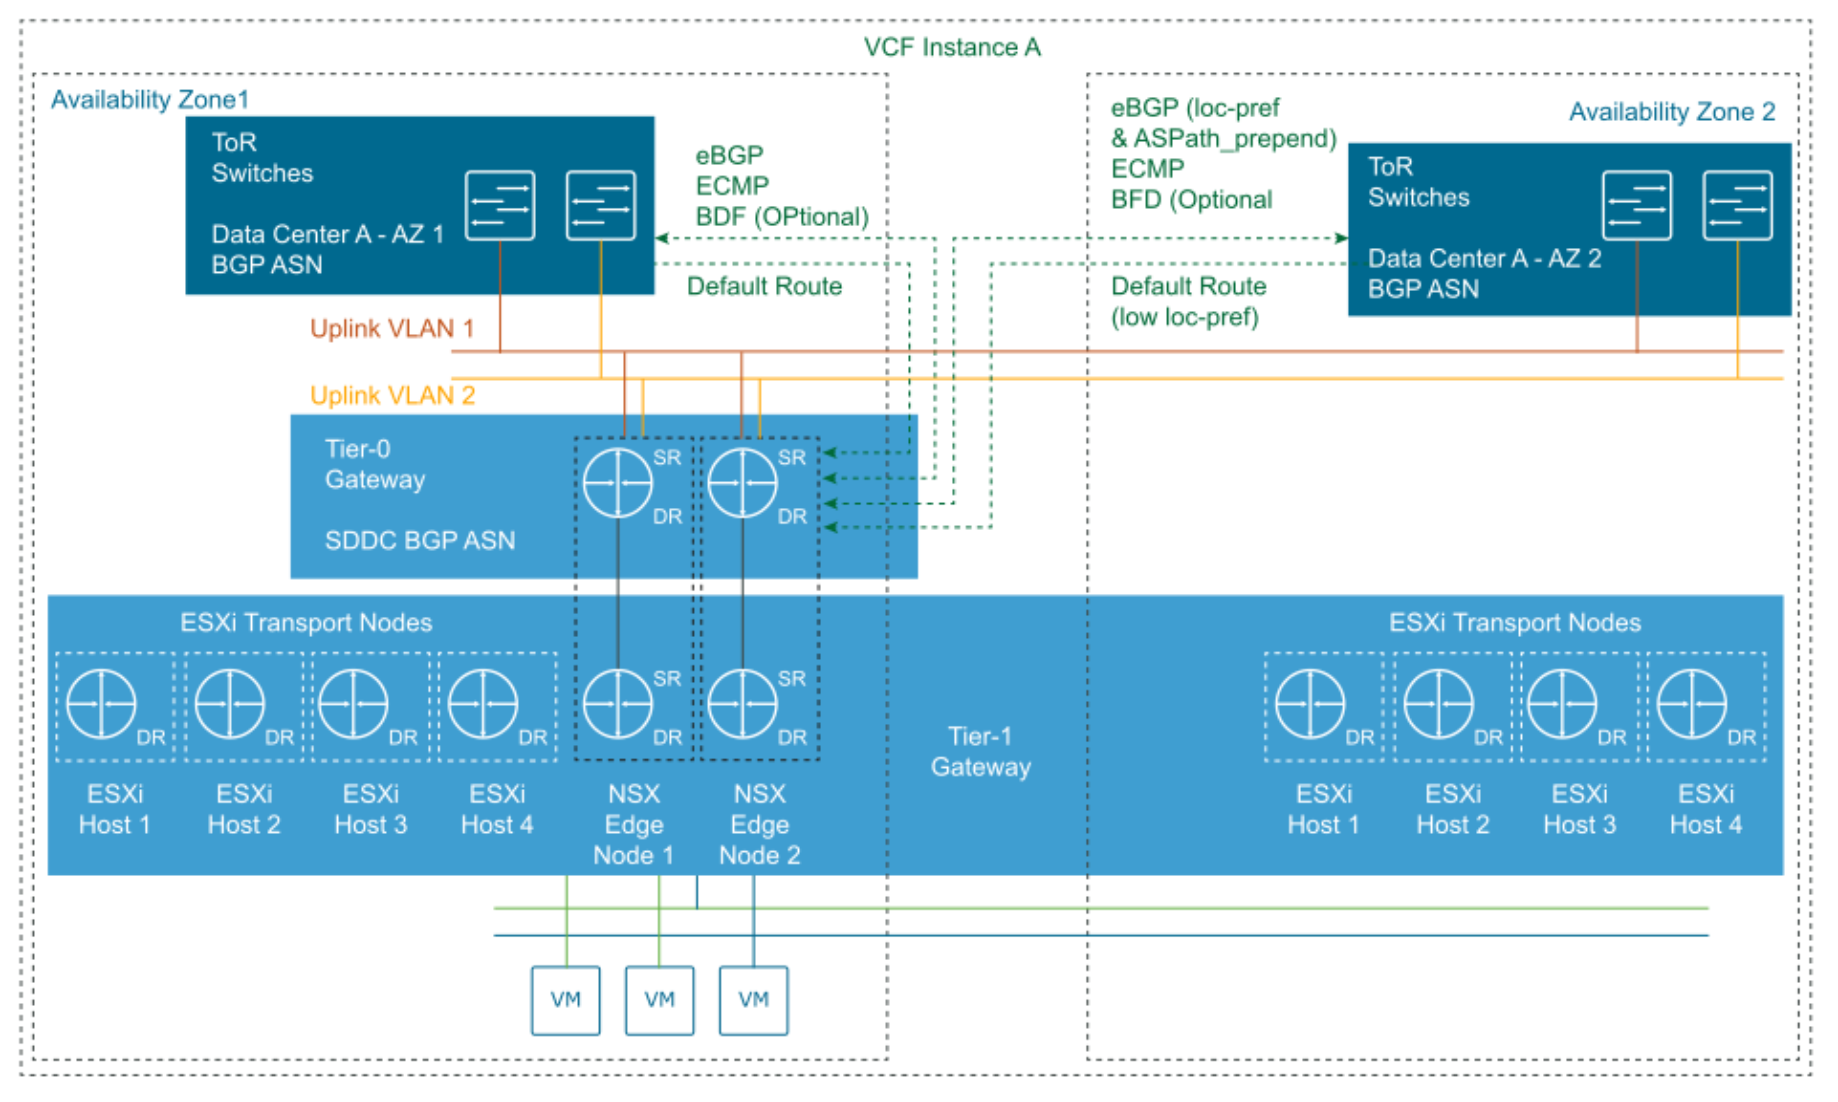 This figure shows the Multi-AZ Mgmt WLD VCF routing design.